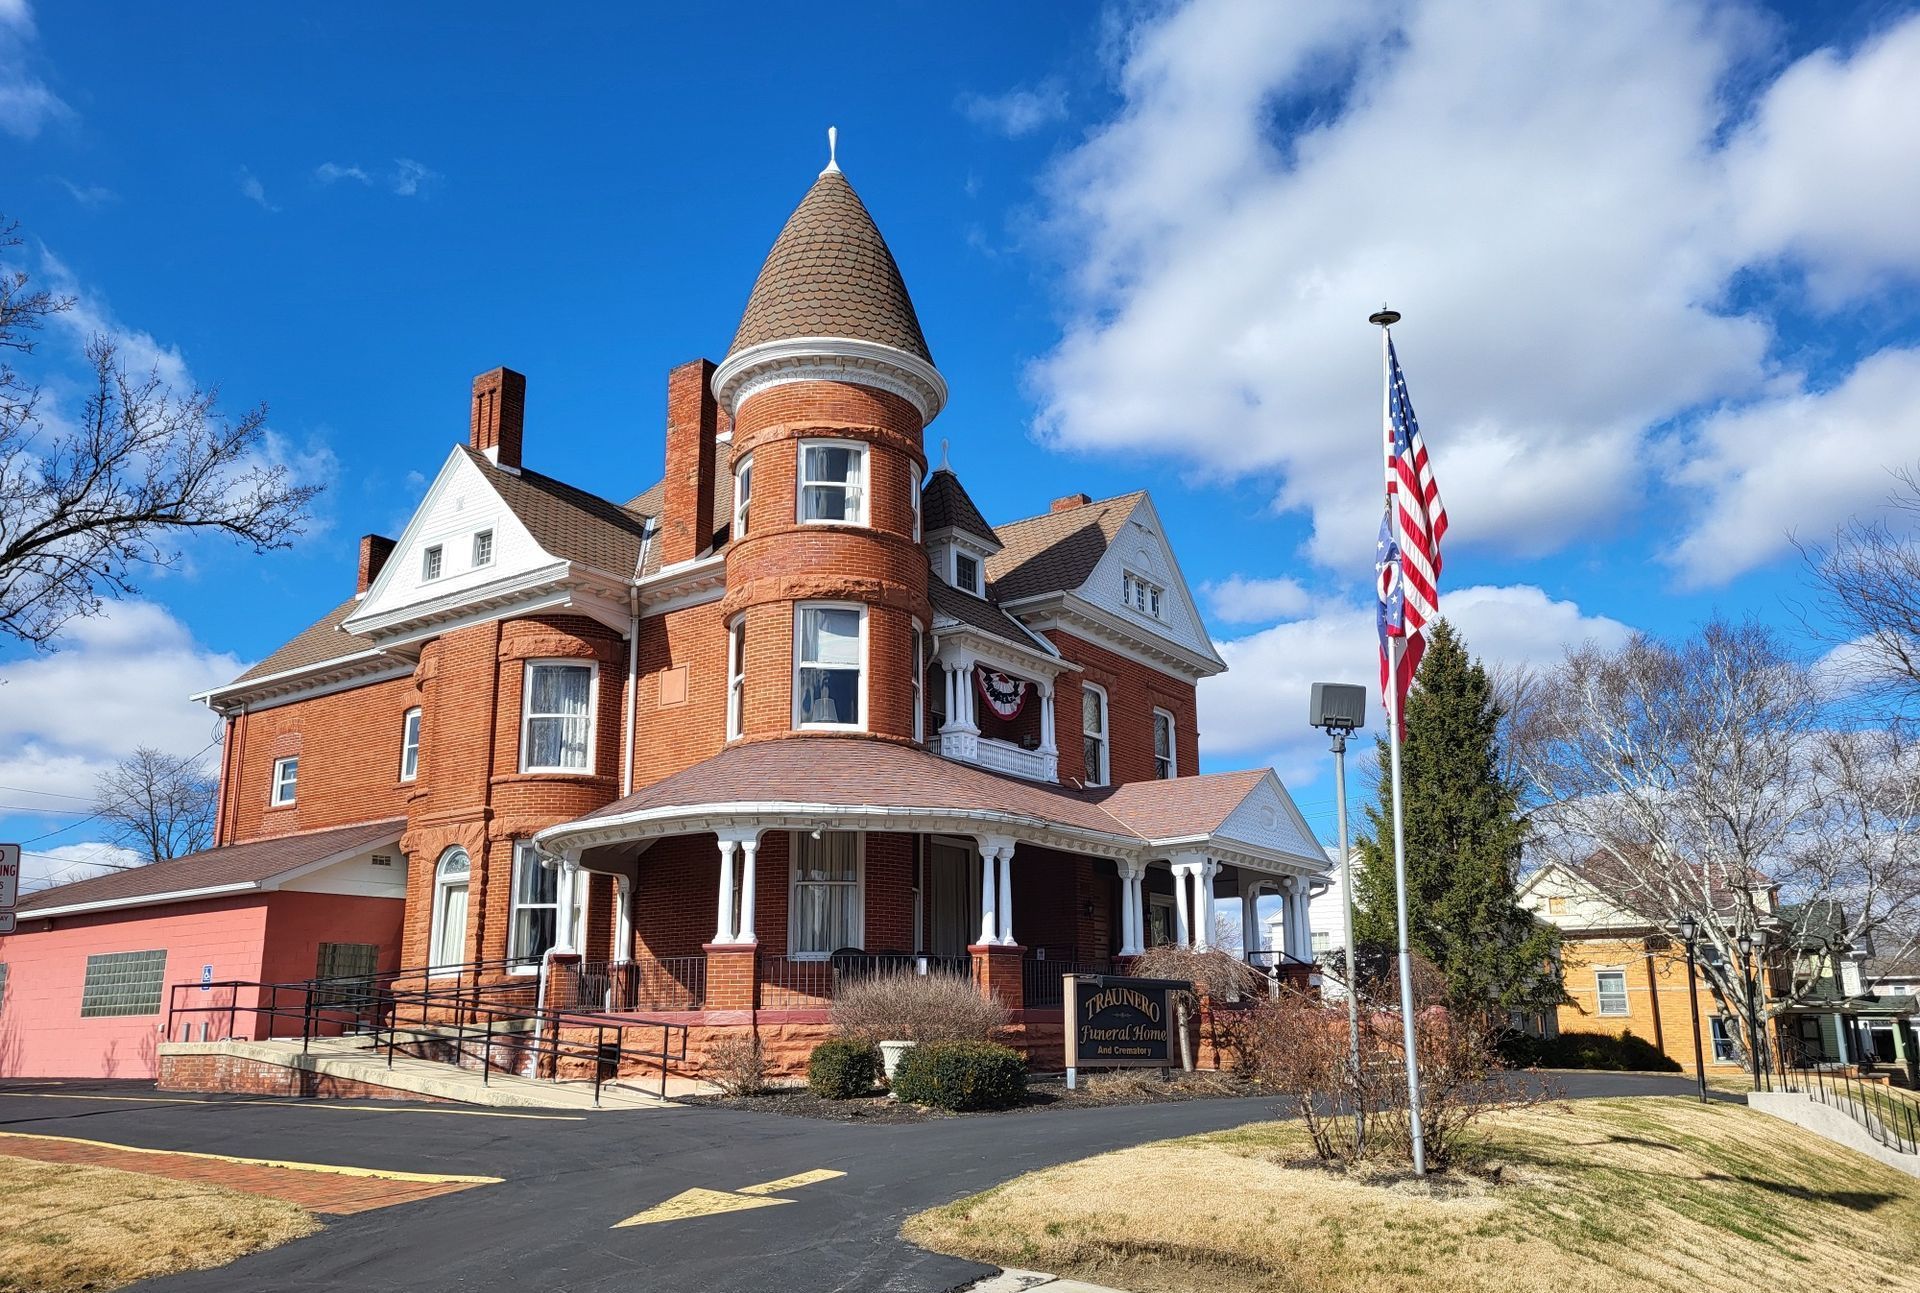 A large brick house with a tower and an american flag in front of it.